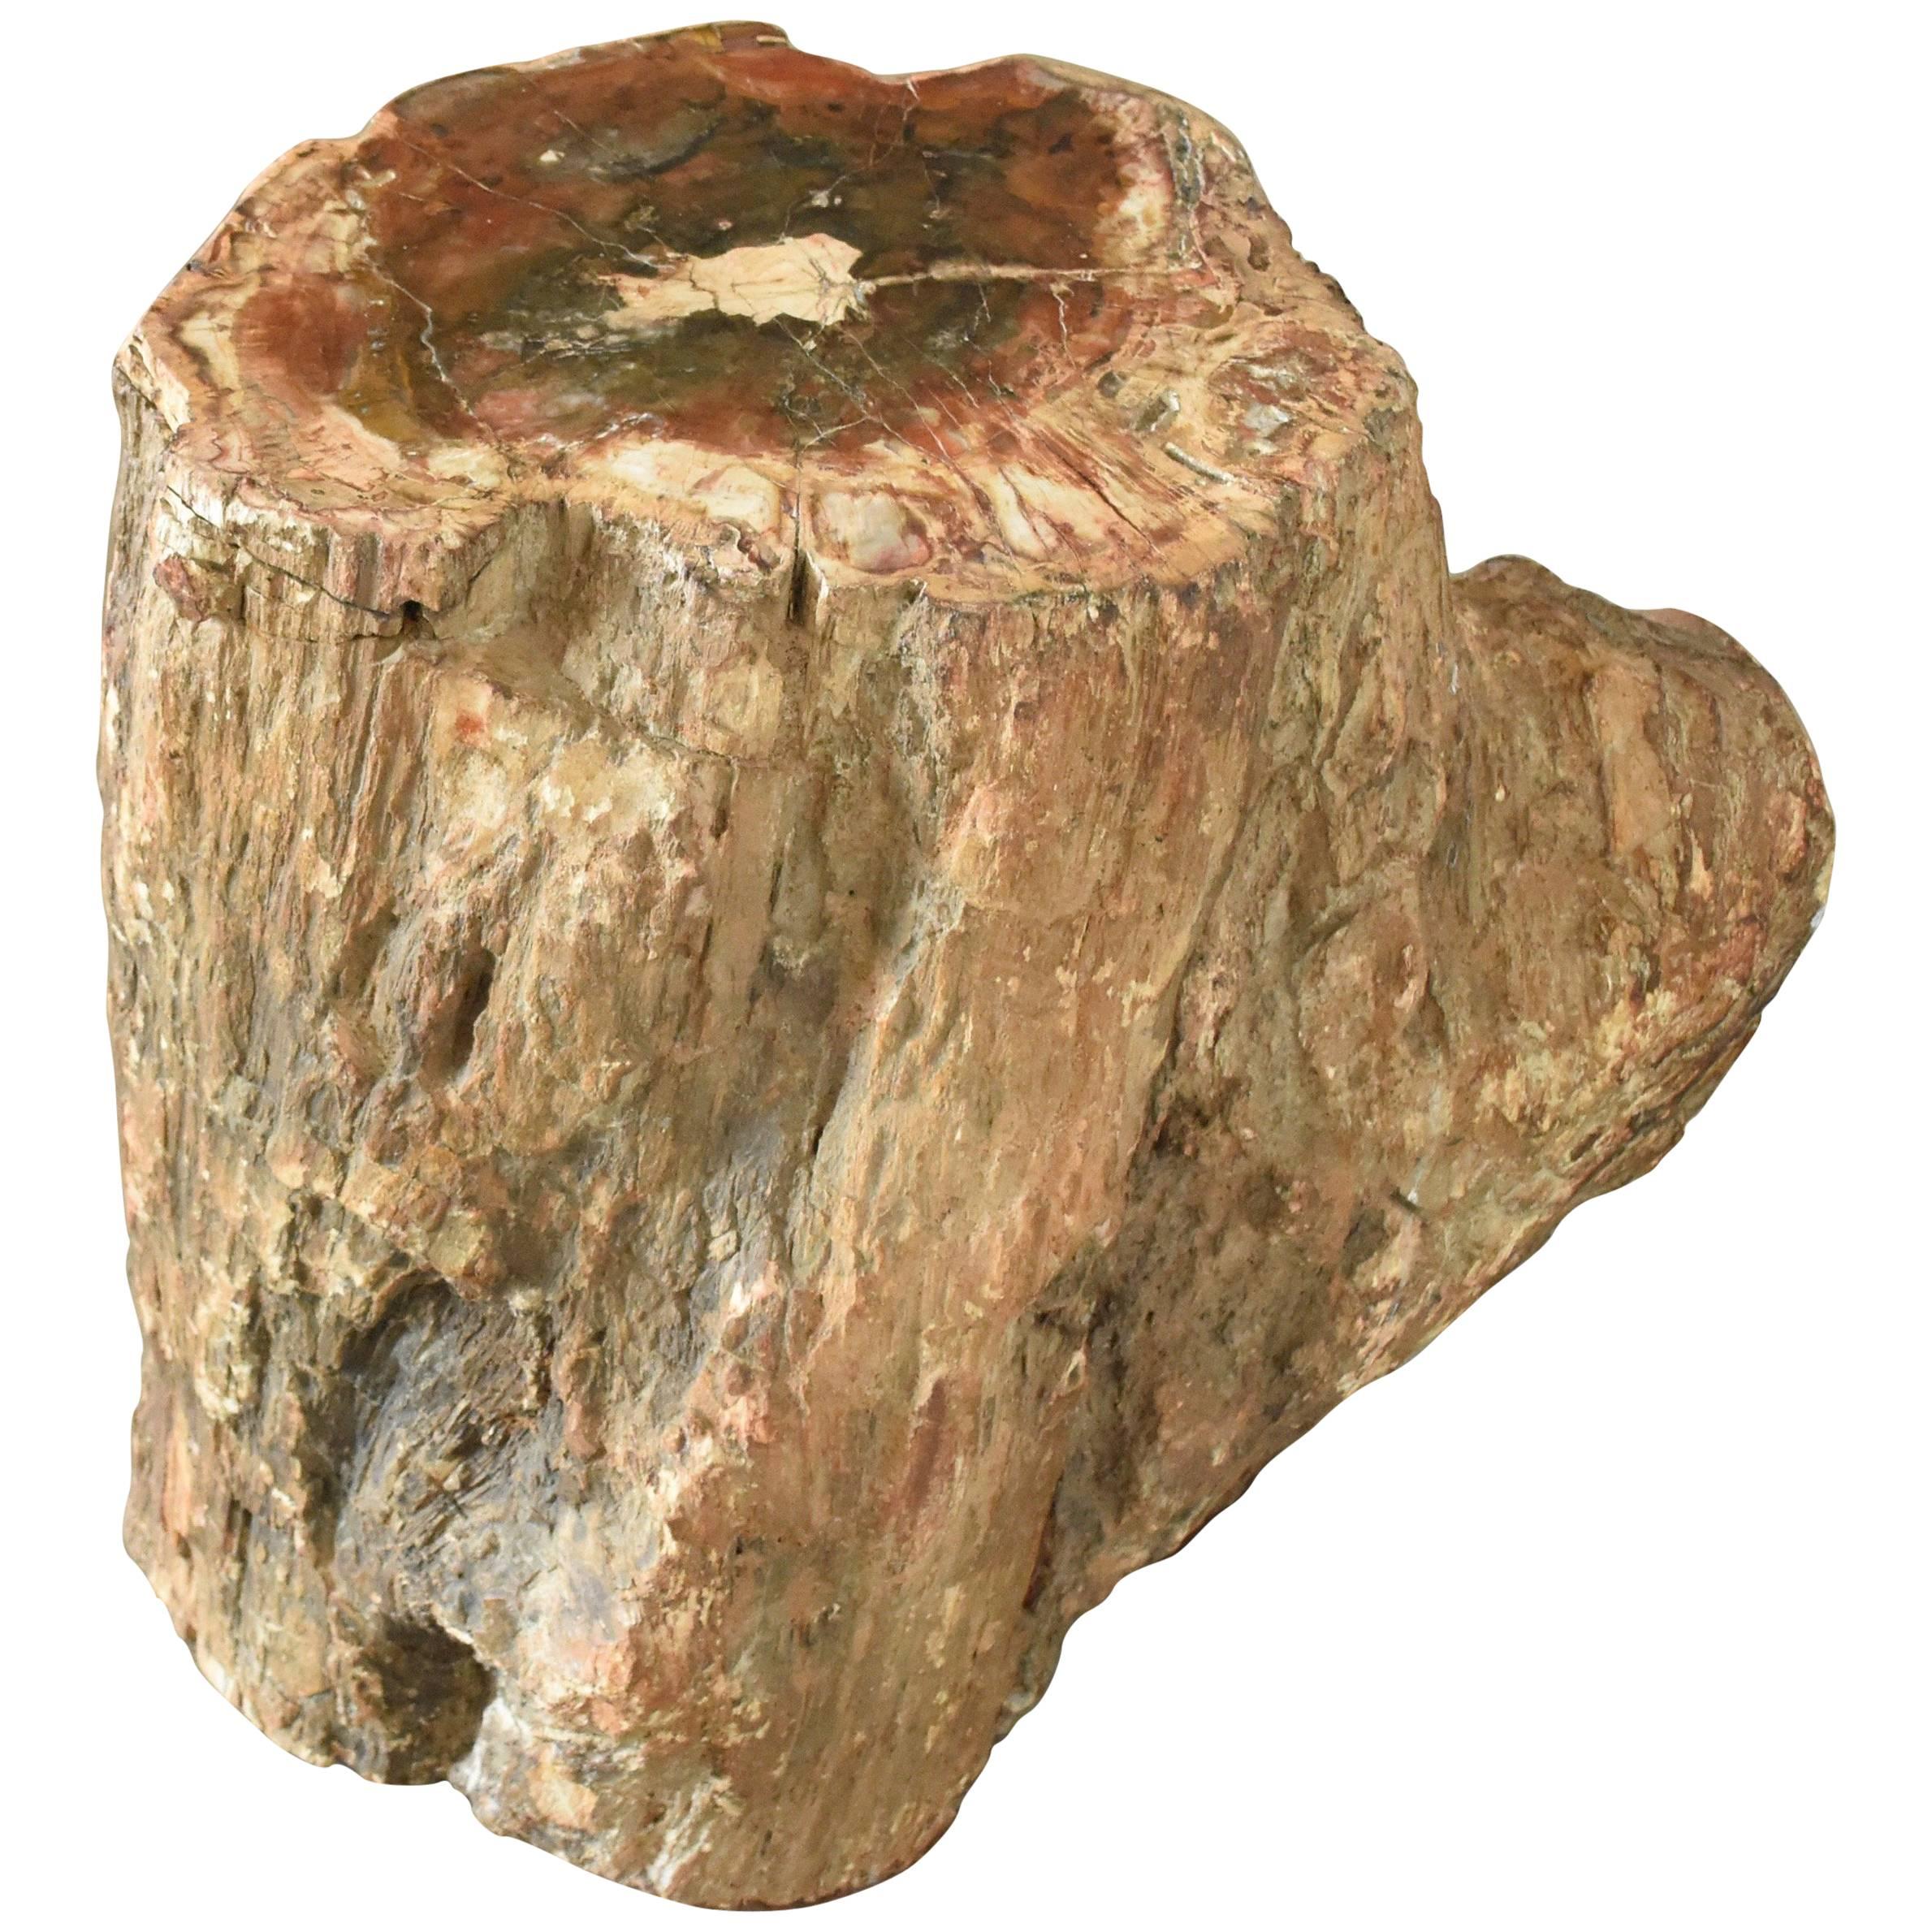 Early Fossilized Petrified Wood Stump from Madagascar, Africa